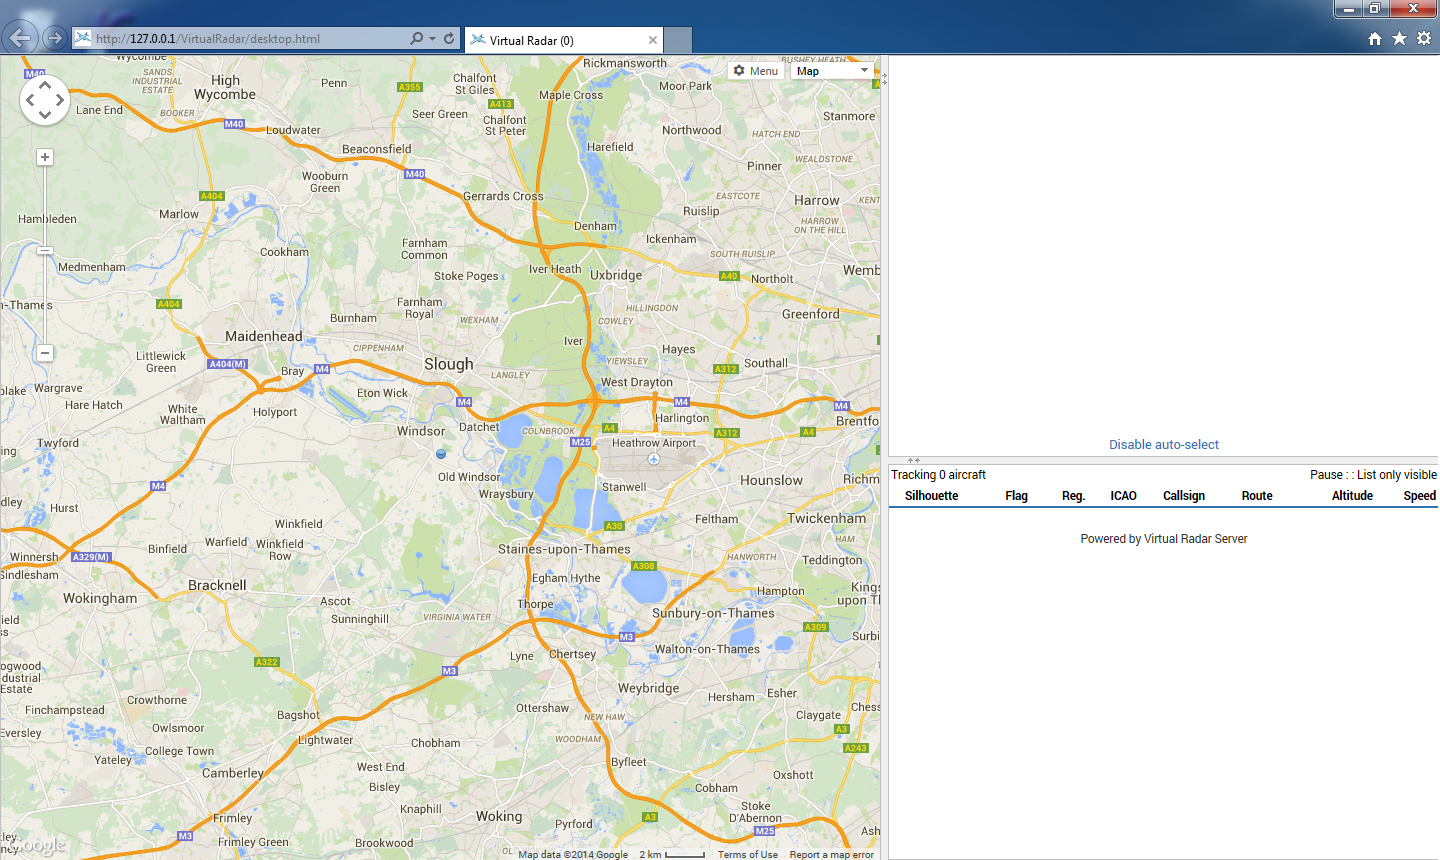 adsb-07_browser-02_initial_location.png